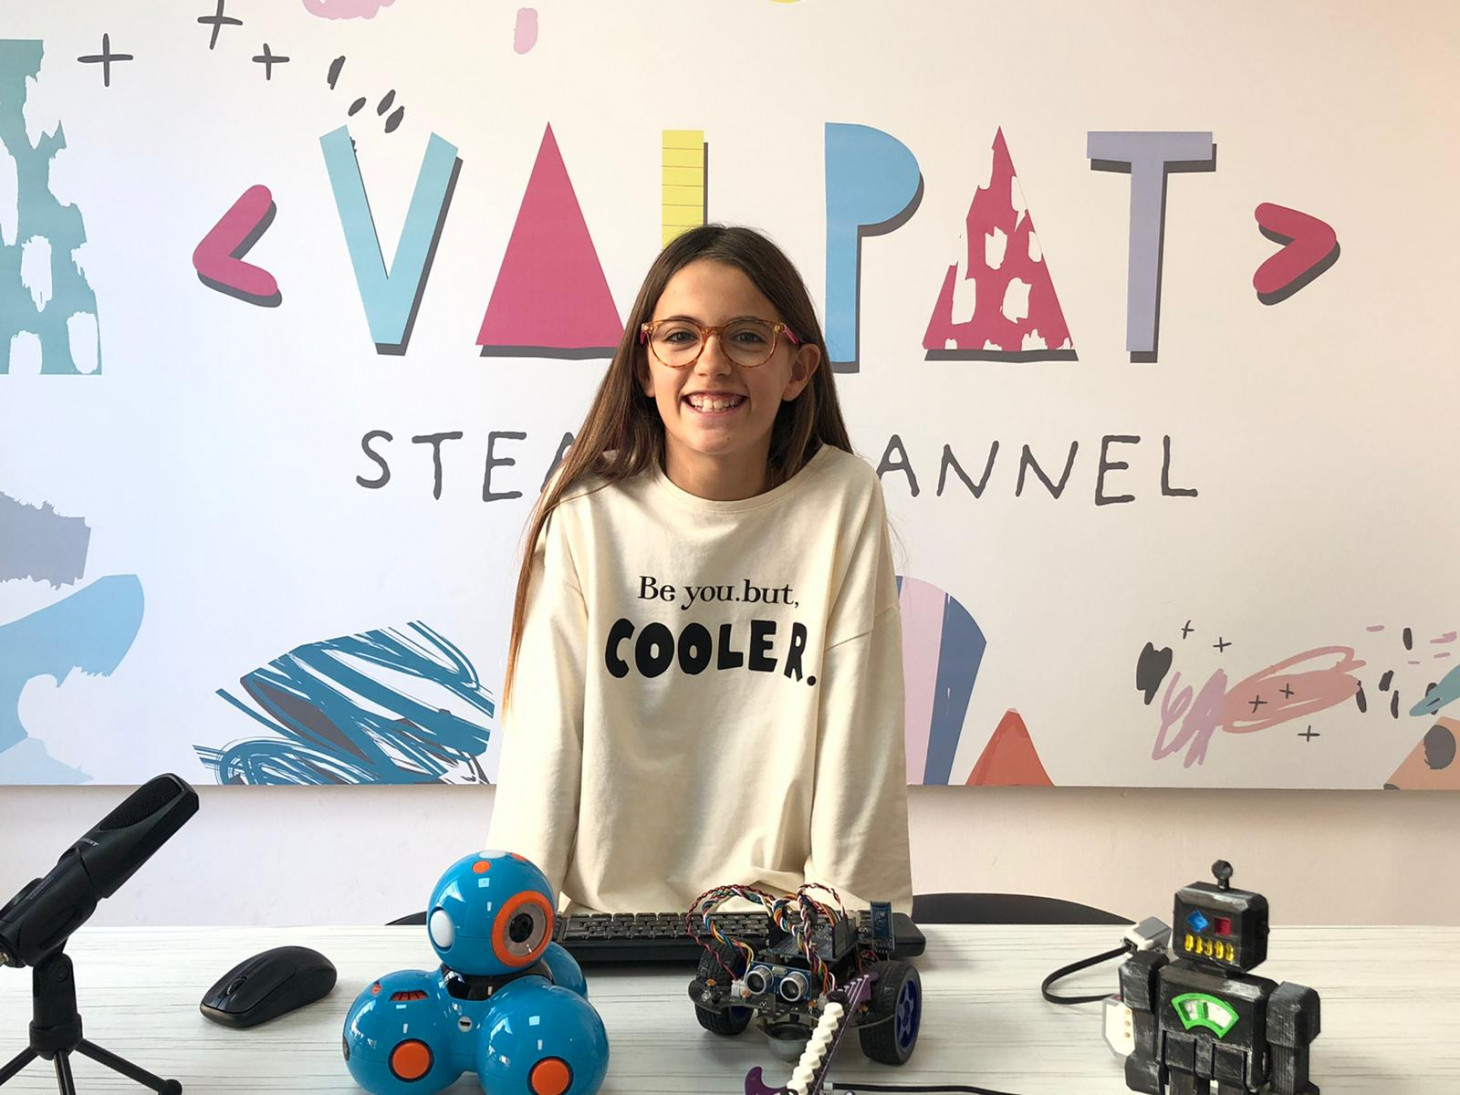 Valeria Corrales - The Minimaker that triumphed in Got Talent